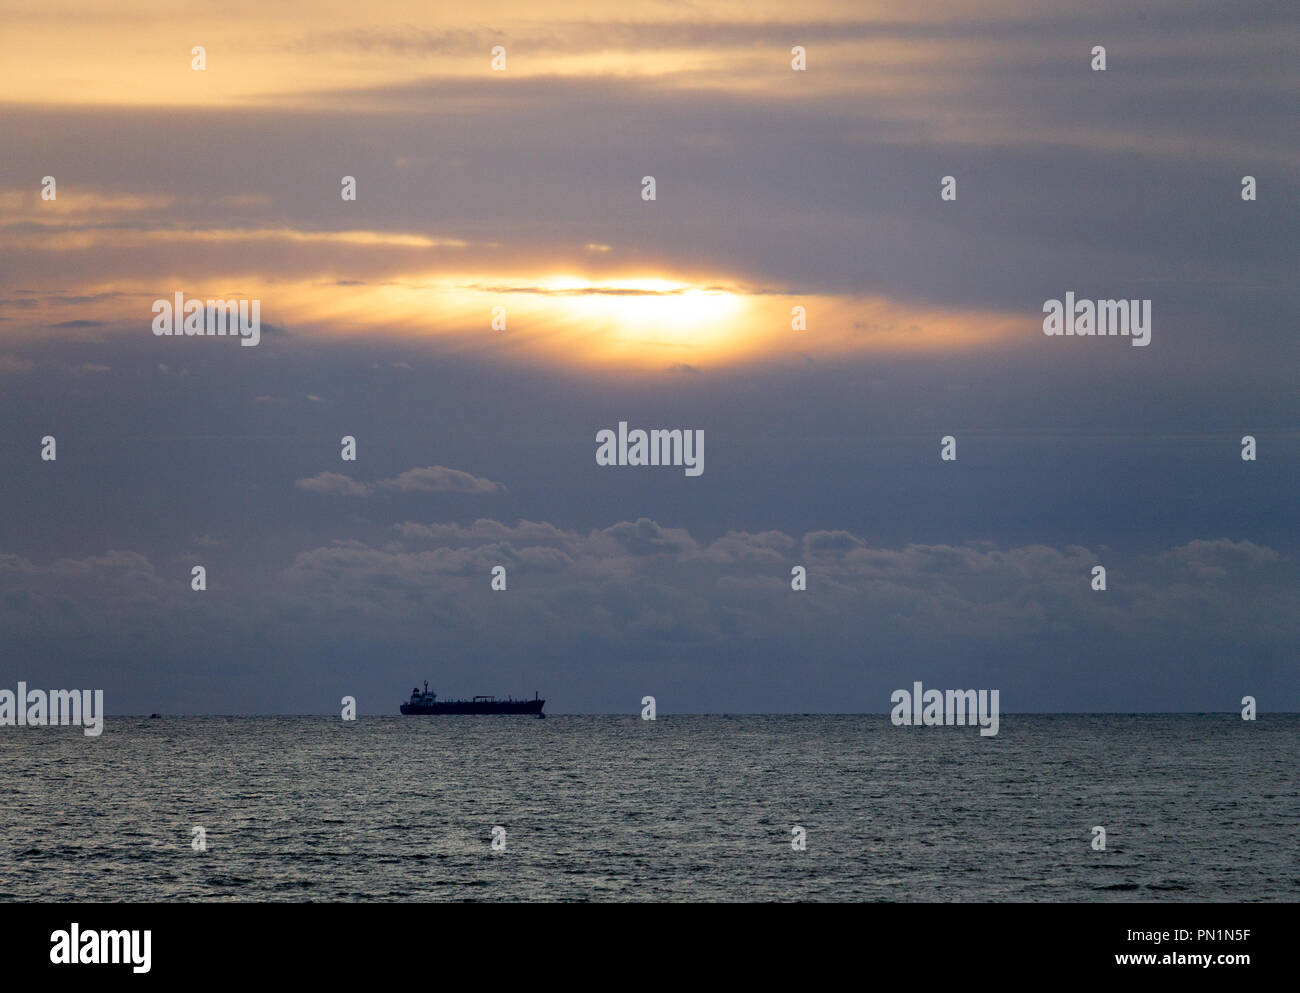 A distant cargo ship is seen on the ocean at the horizon, with the sun peaking through the clouds. Stock Photo